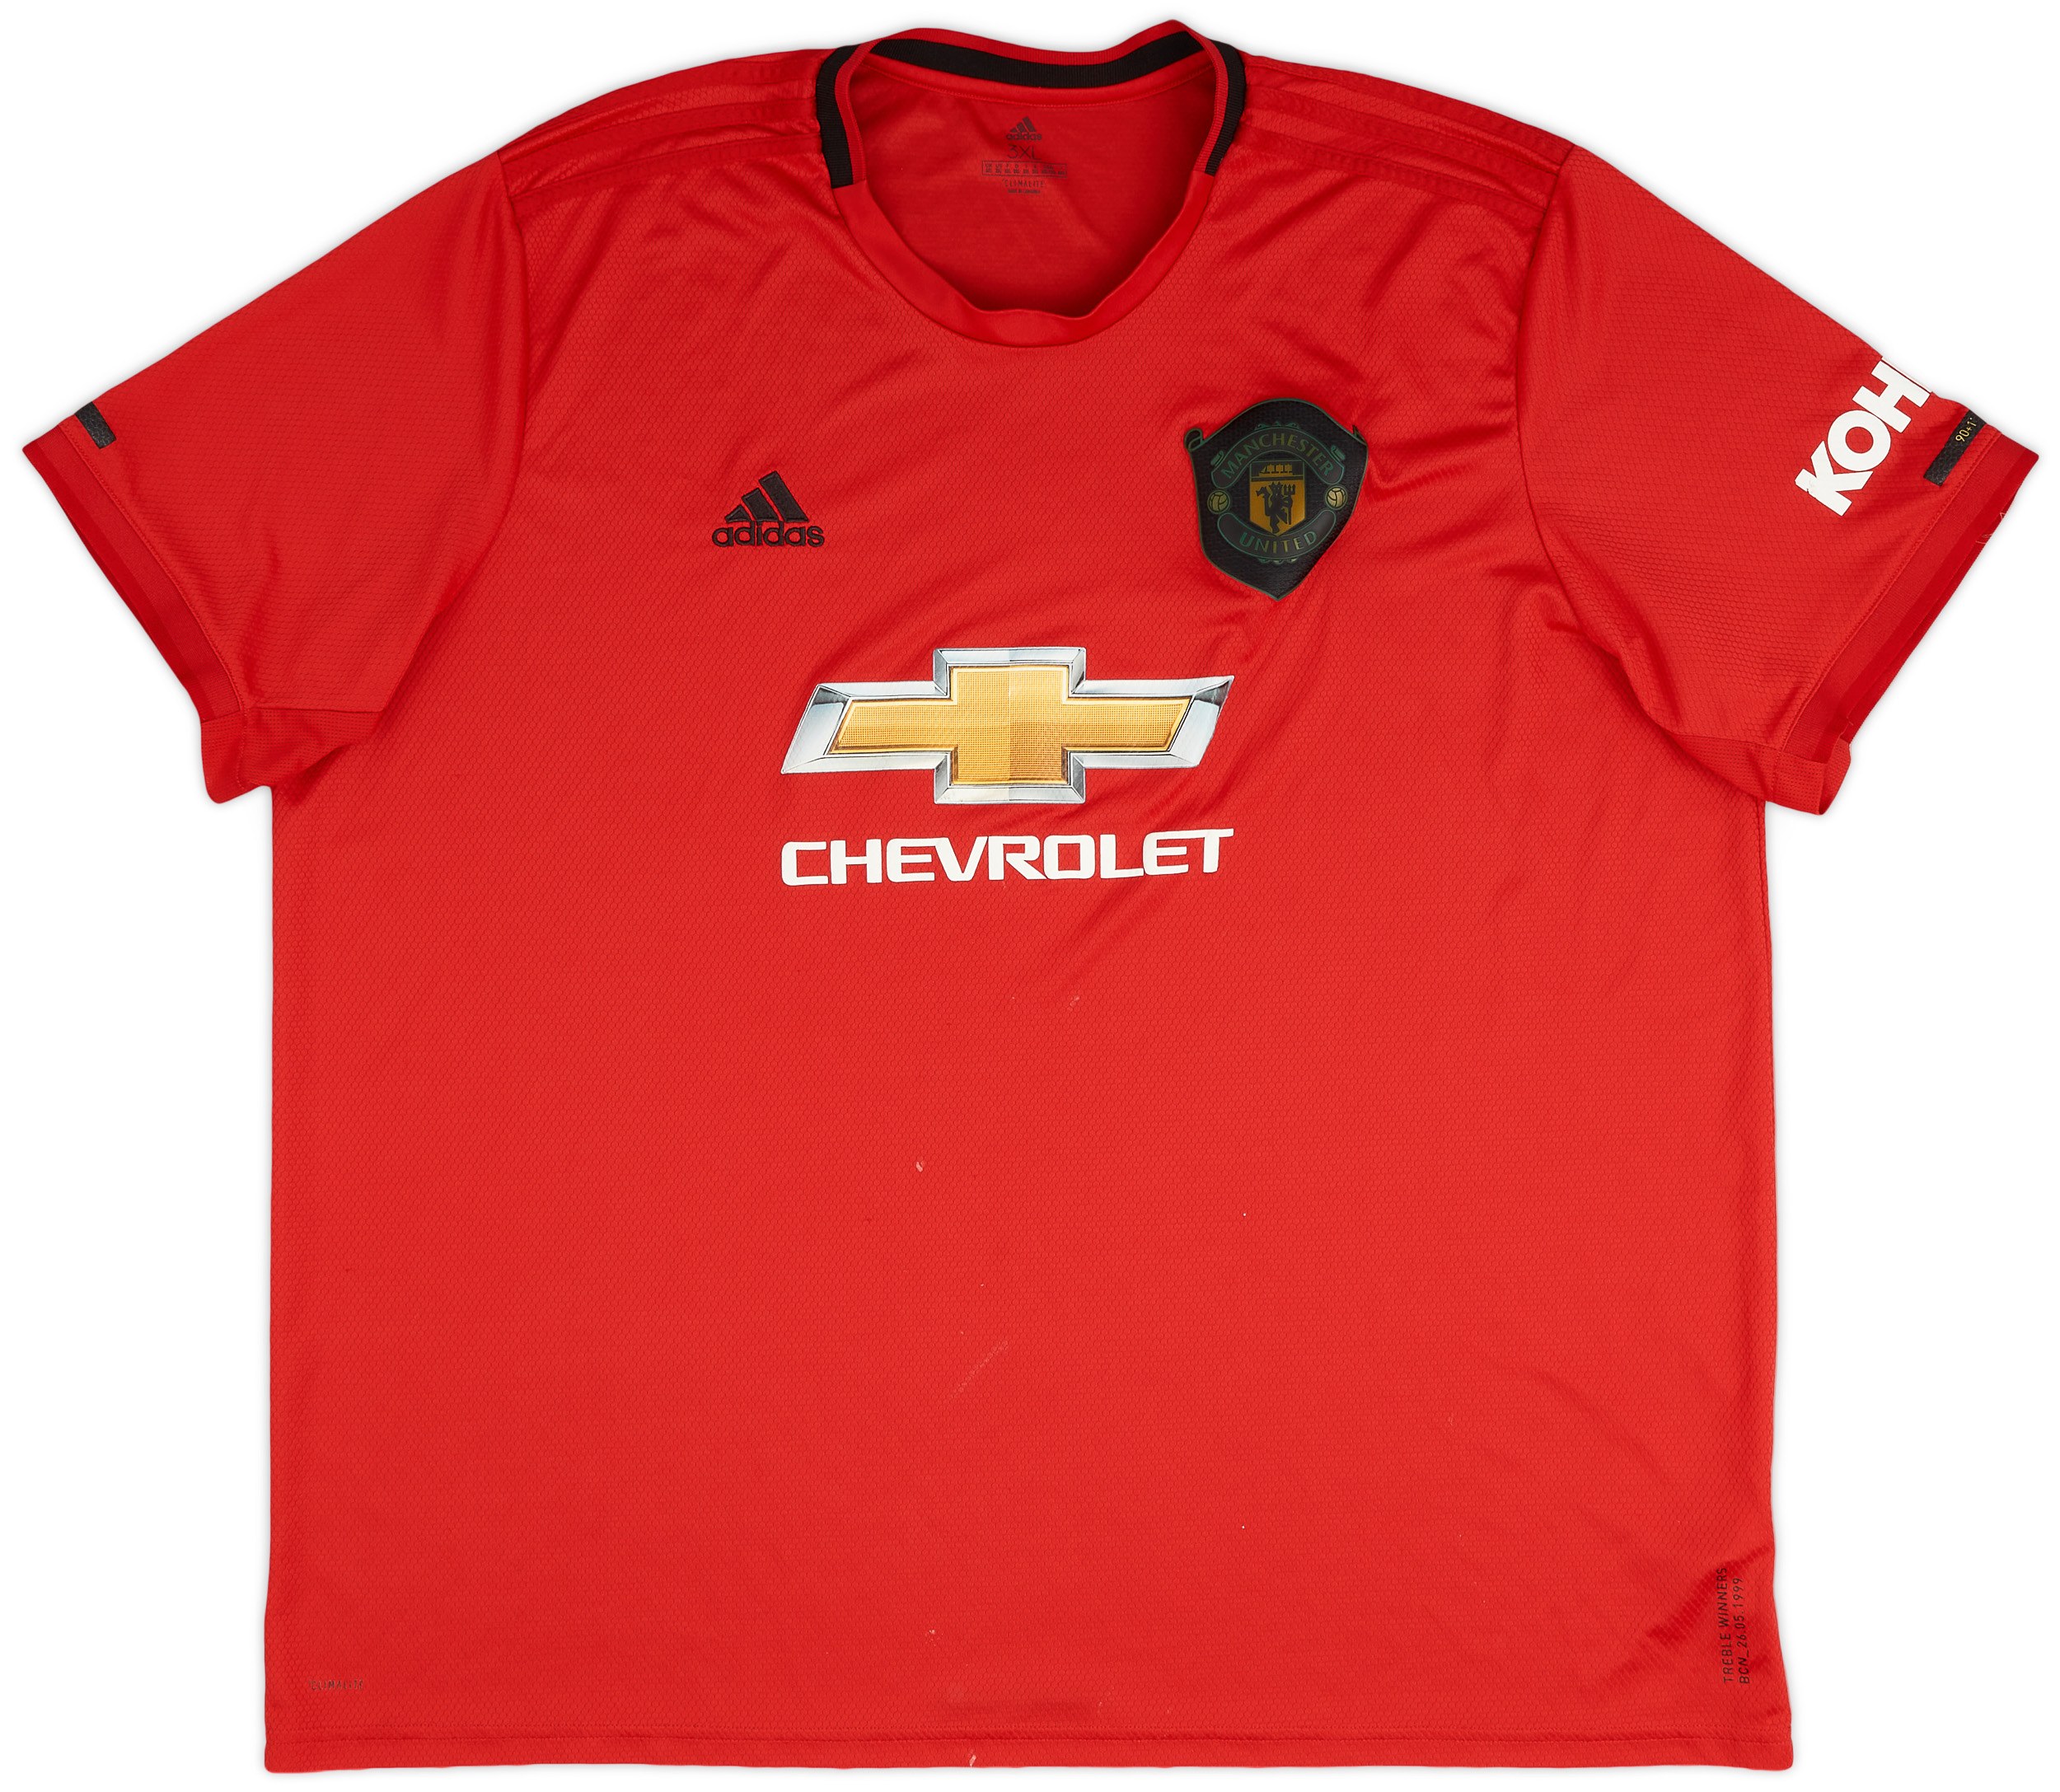 2019-20 Manchester United Home Shirt - 7/10 - ()